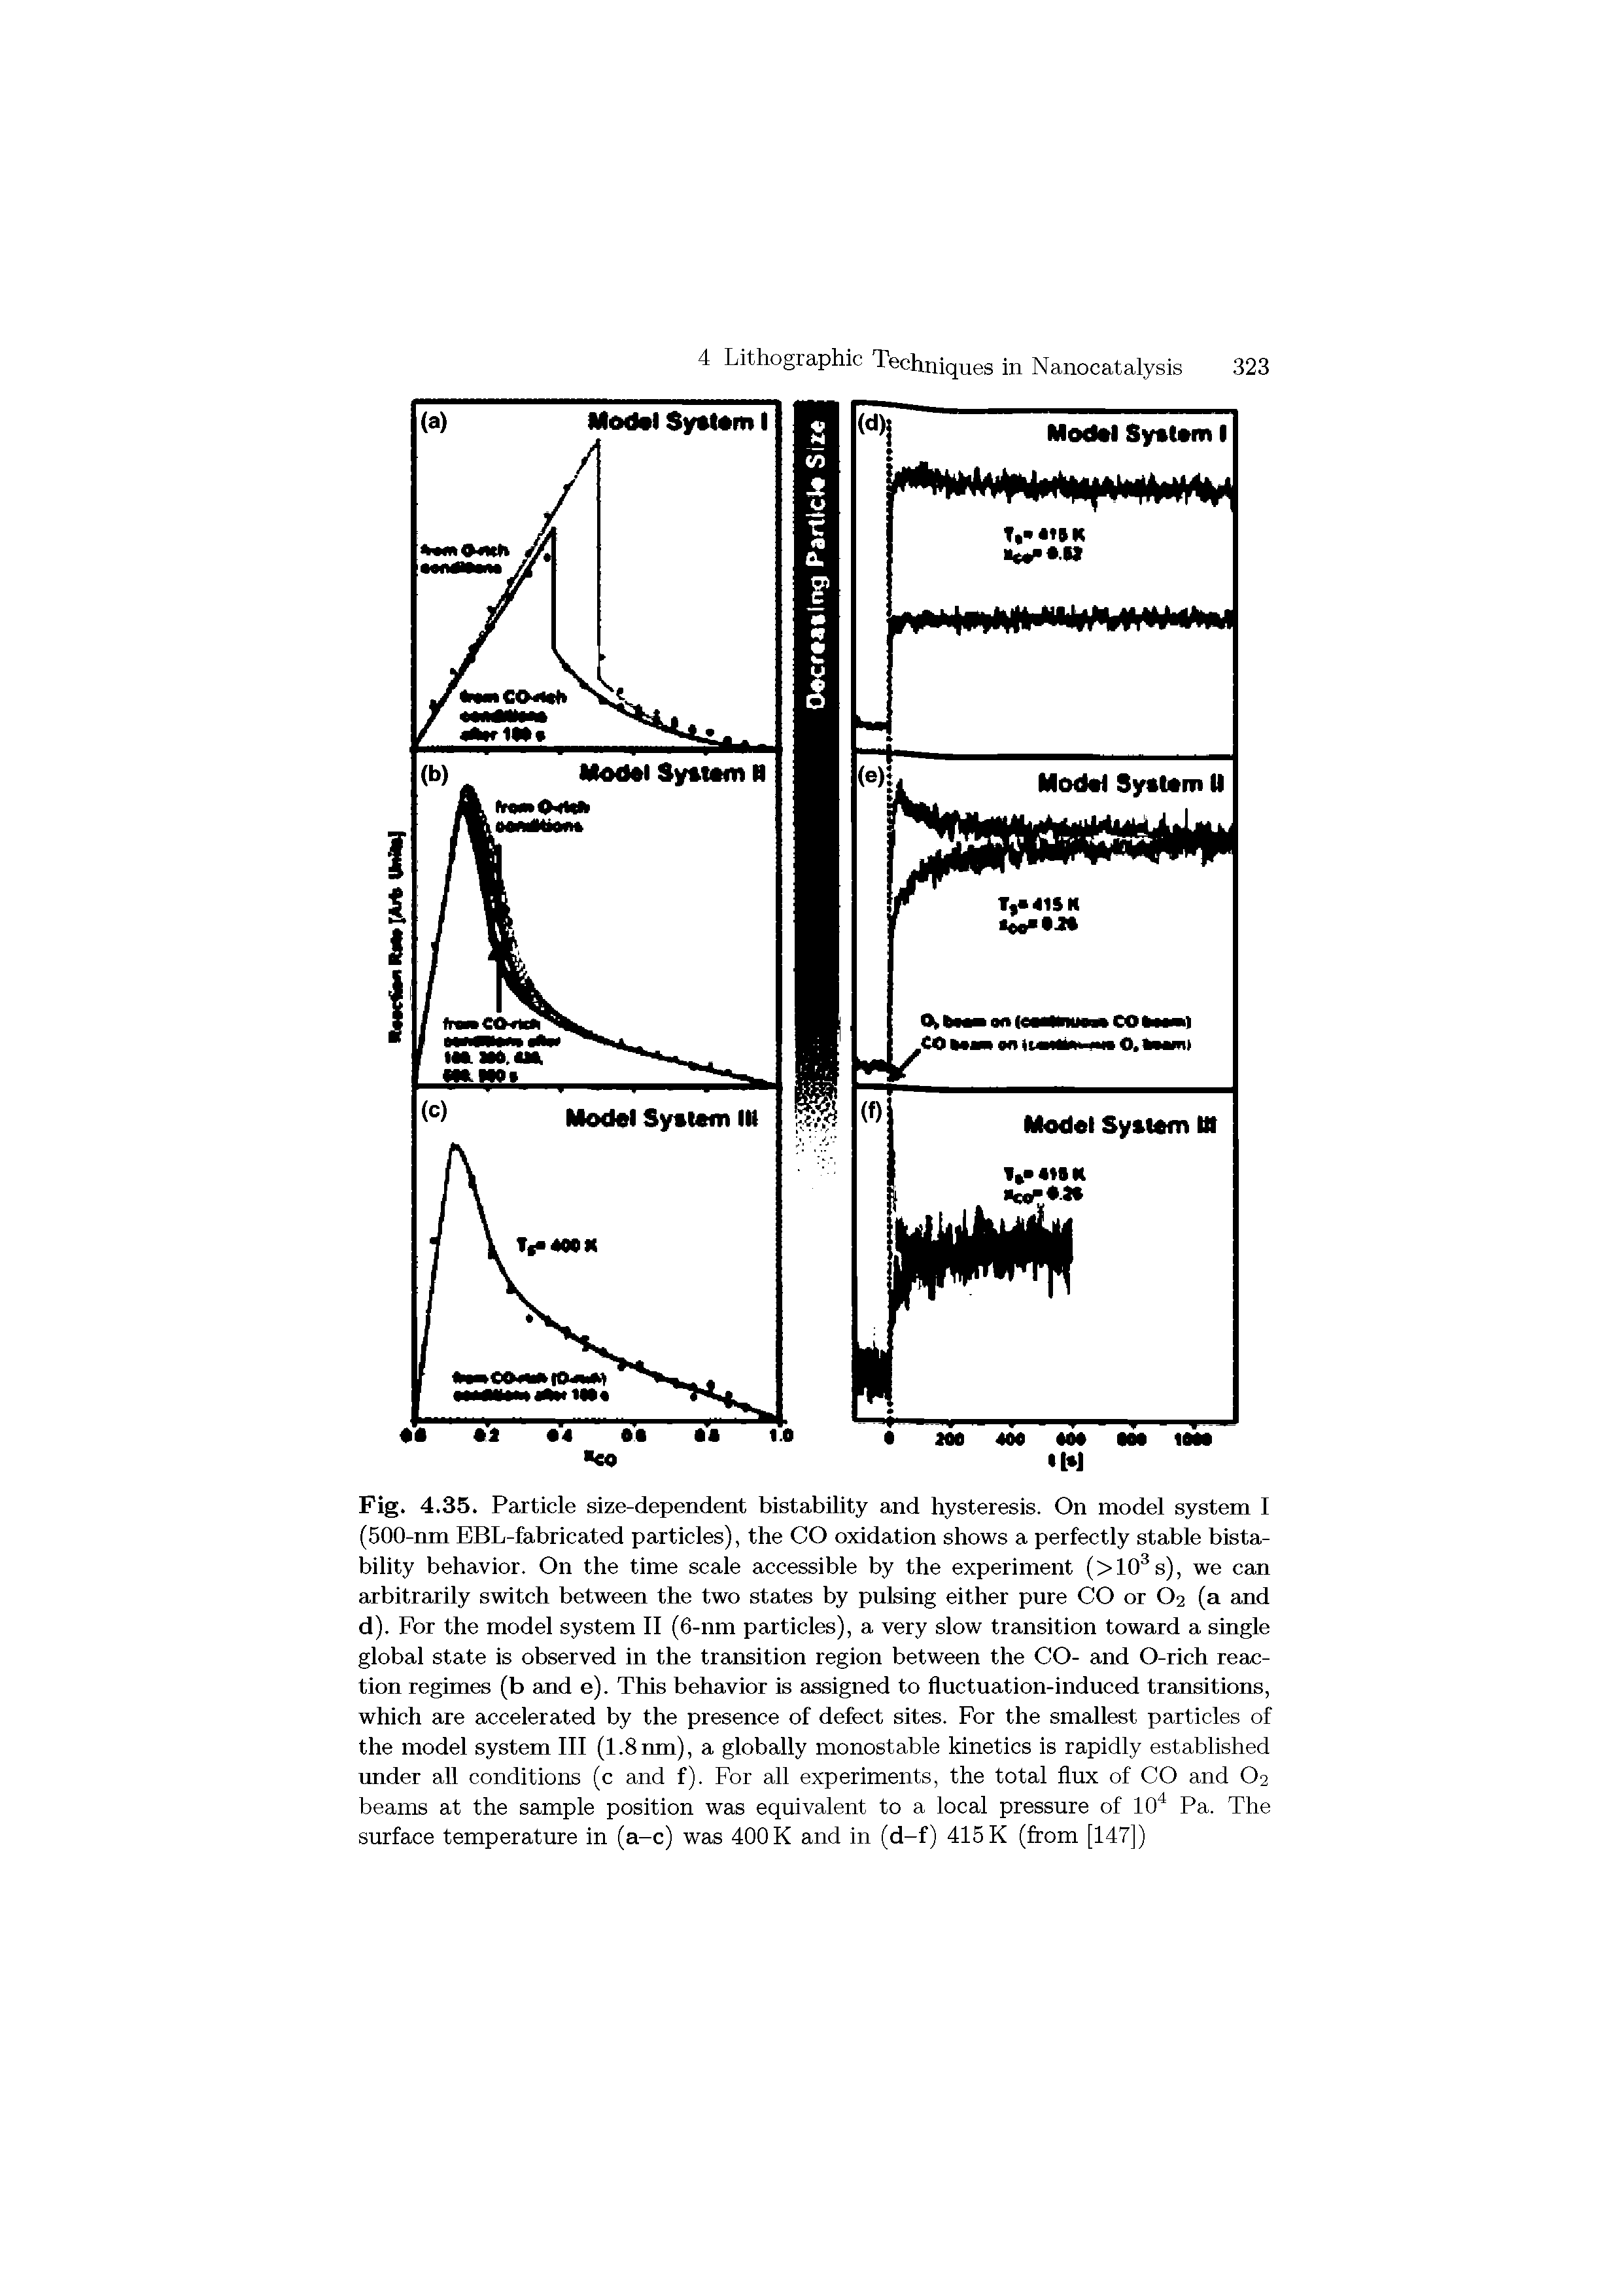 Fig. 4.35. Particle size-dependent bistability and hysteresis. On model system I (500-nm EBL-fabricated particles), the CO oxidation shows a perfectly stable bistability behavior. On the time scale accessible by the experiment (>10 s), we can arbitrarily switch between the two states by pulsing either pure CO or O2 (a and d). For the model system II (6-nm particles), a very slow transition toward a single global state is observed in the transition region between the CO- and O-rich reaction regimes (b and e). This behavior is assigned to fluctuation-induced transitions, which are accelerated by the presence of defect sites. For the smallest particles of the model system III (1.8 nm), a globally monostable kinetics is rapidly established under all conditions (c and f). For all experiments, the total flux of CO and O2 beams at the sample position was equivalent to a local pressure of 10" Pa. The surface temperature in (a-c) was 400 K and in (d-f) 415 K (from [147])...